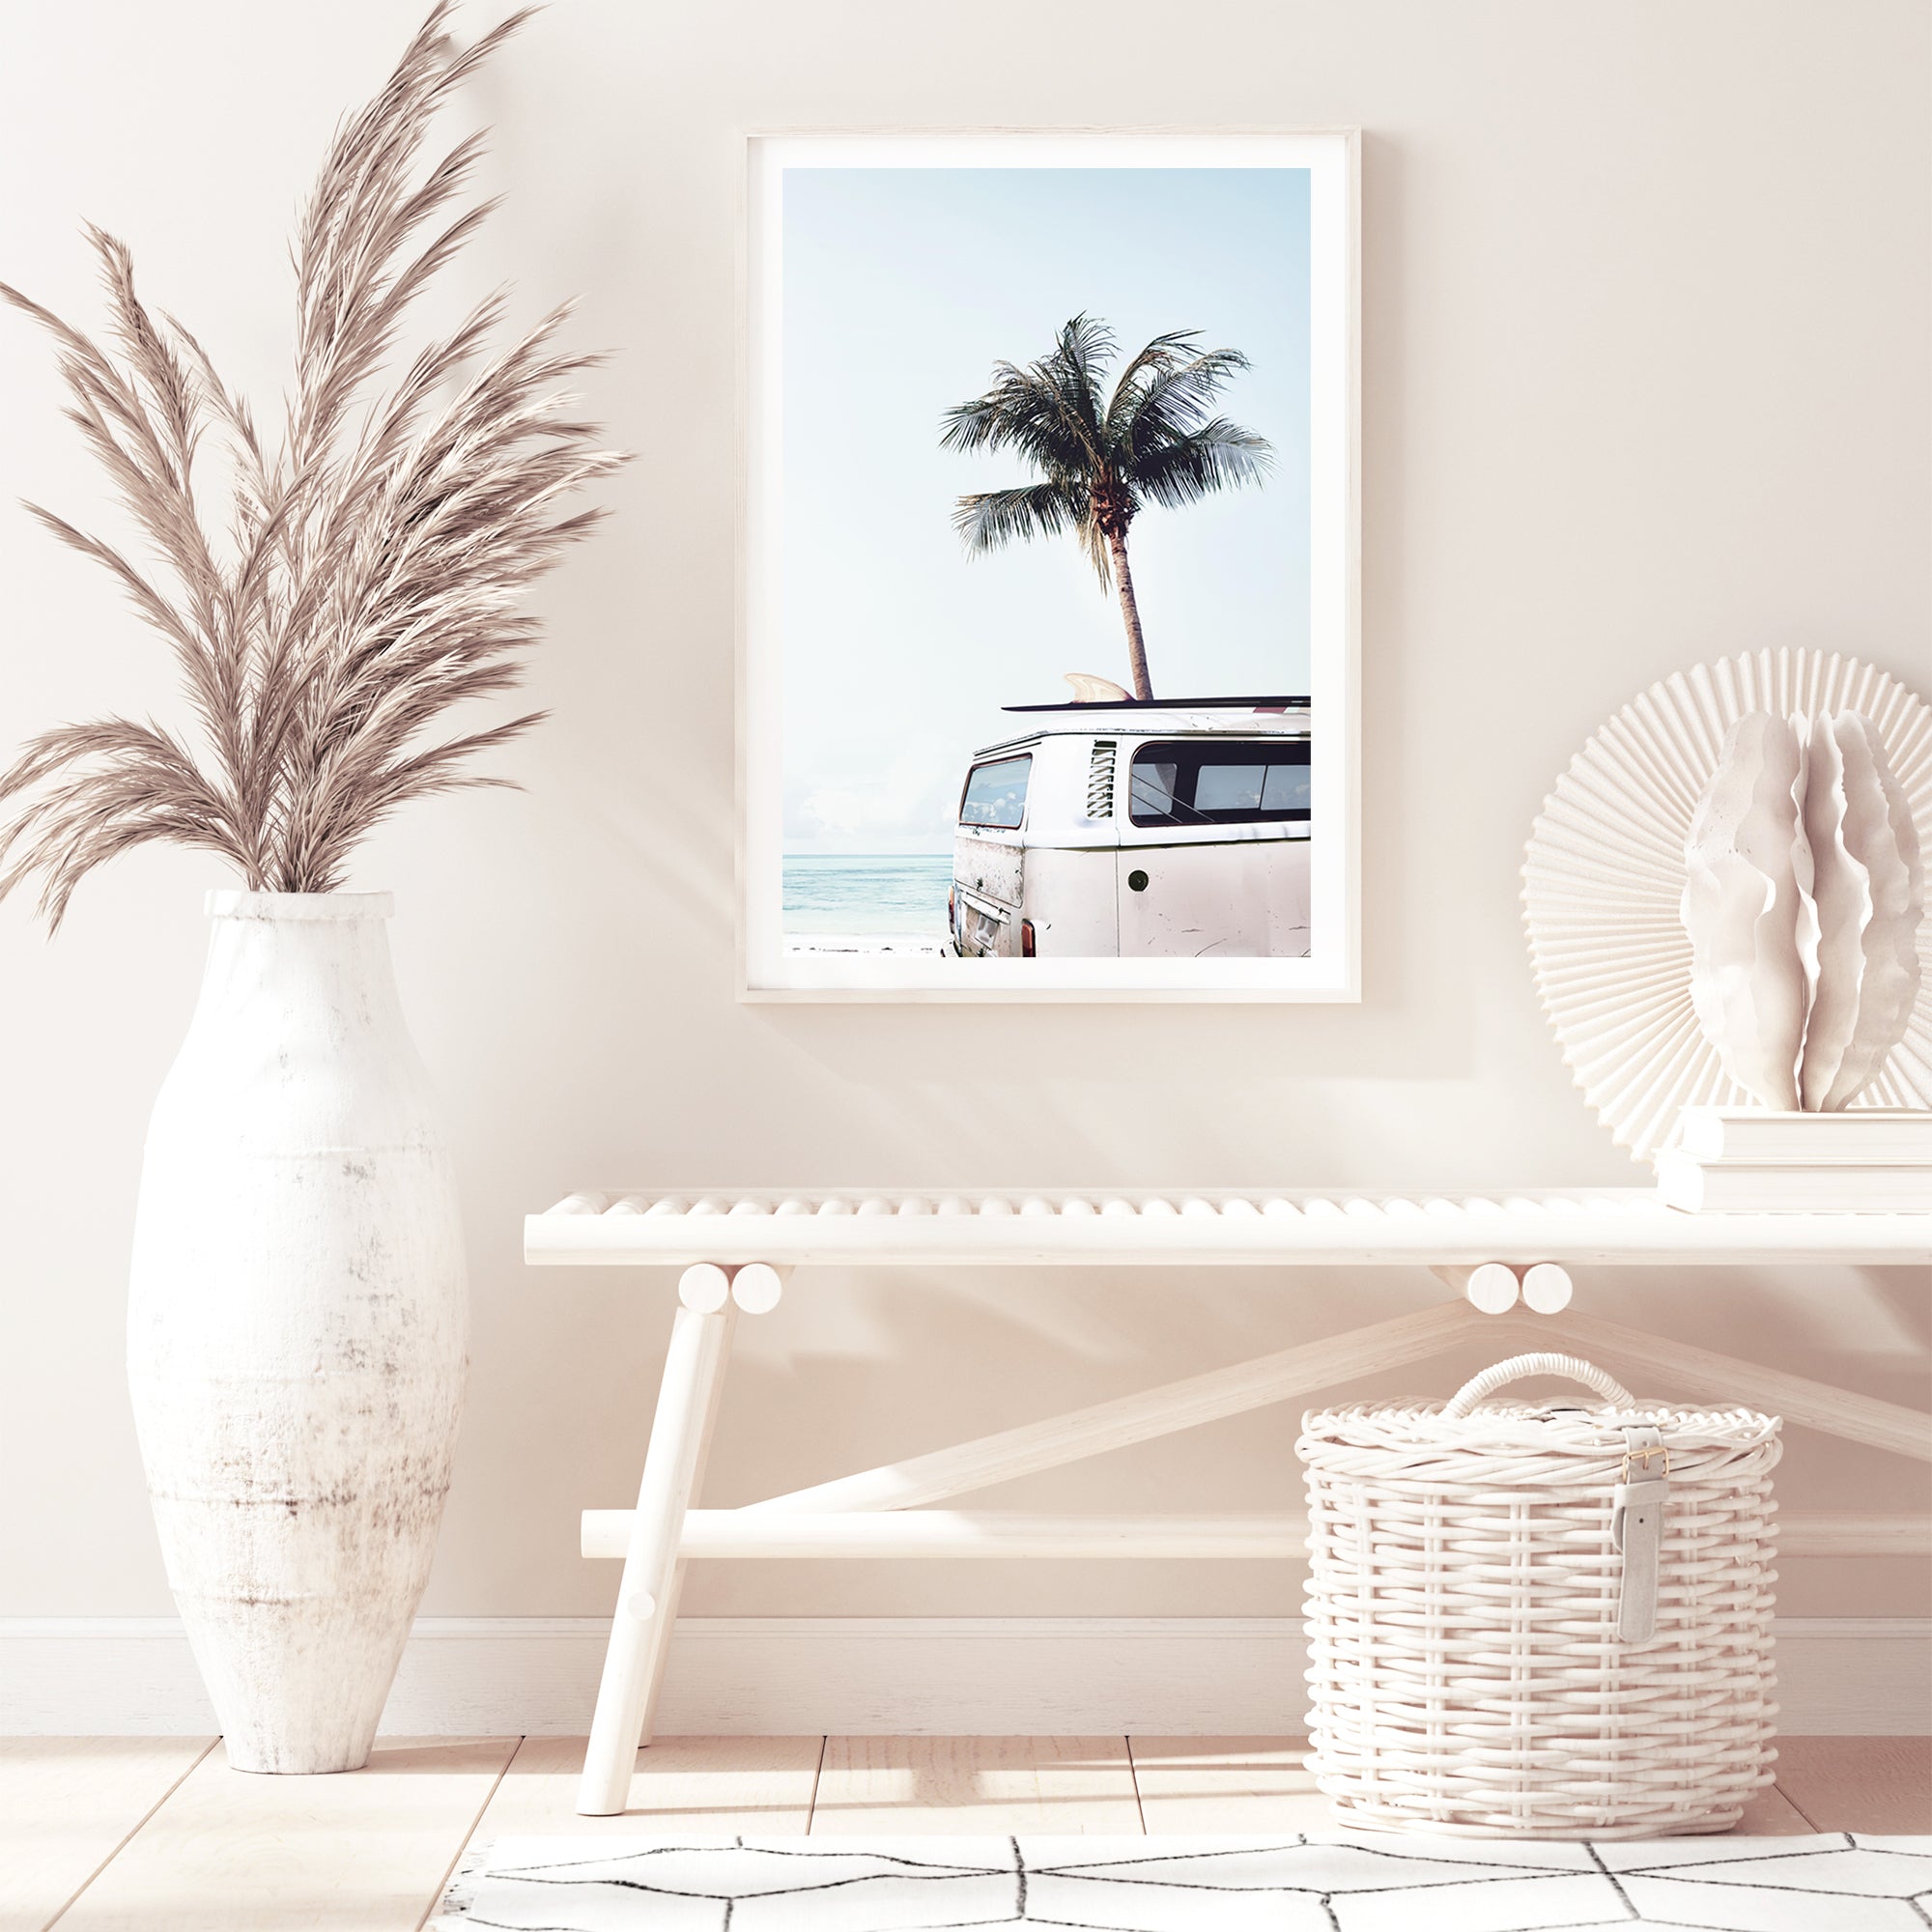 A blue Kombi van at the beach with a blue sky and palm trees available in a canvas or photo wall art print.